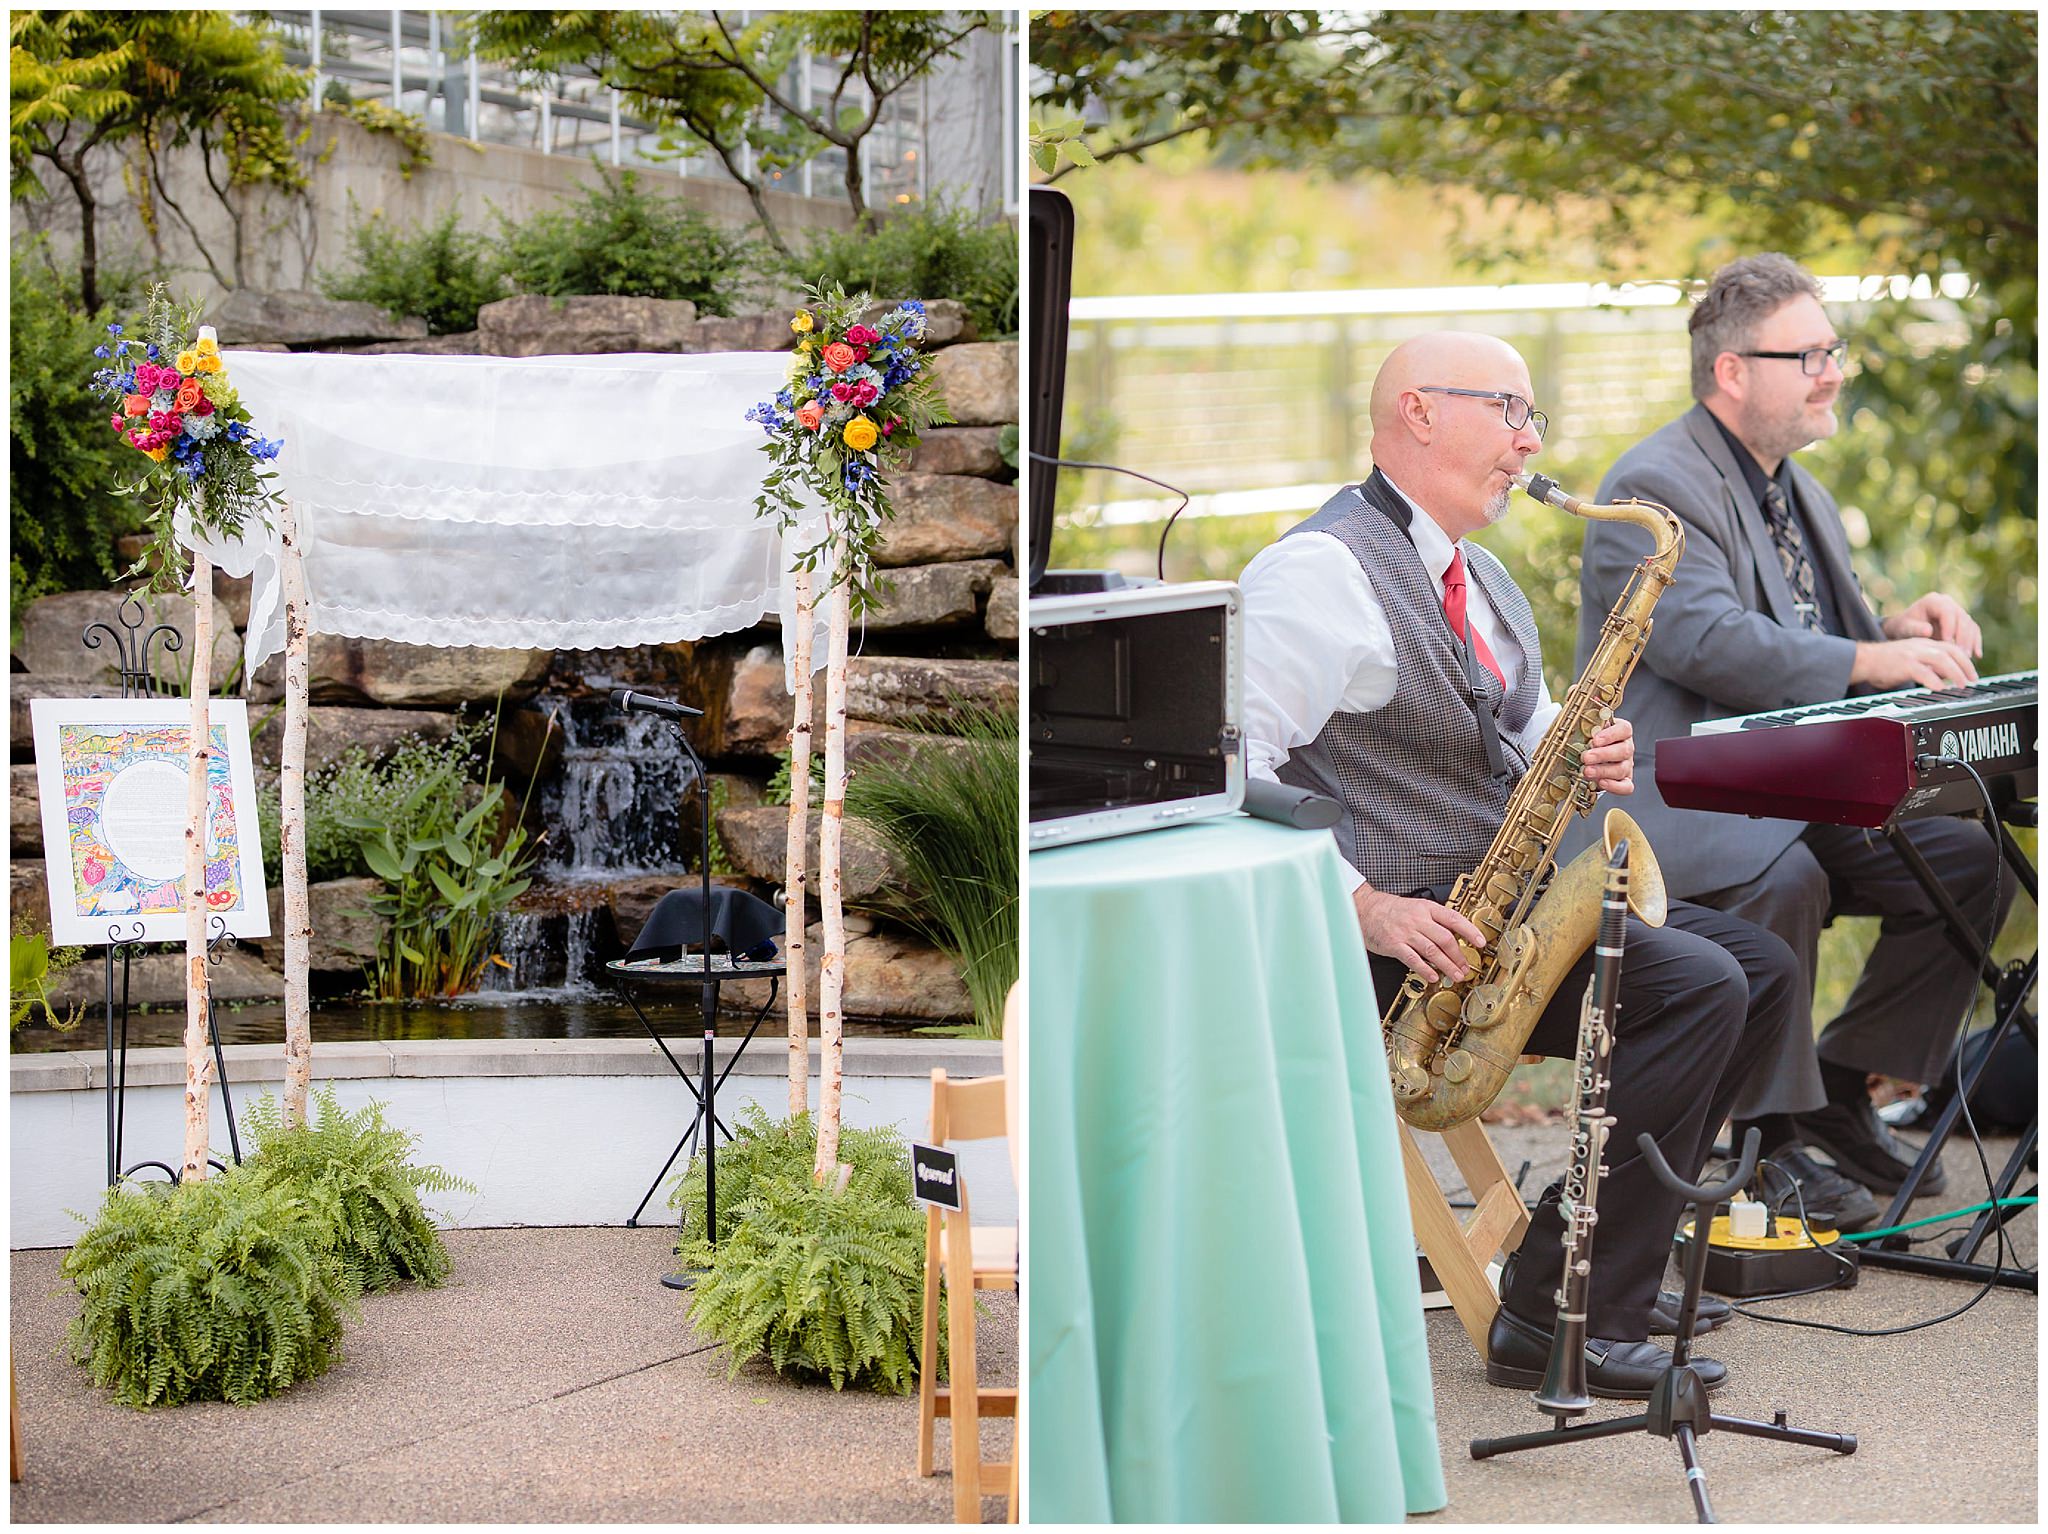 The chuppah decorated for a Jewish wedding at Phipps Conservatory as Matt Ferrante plays saxophone